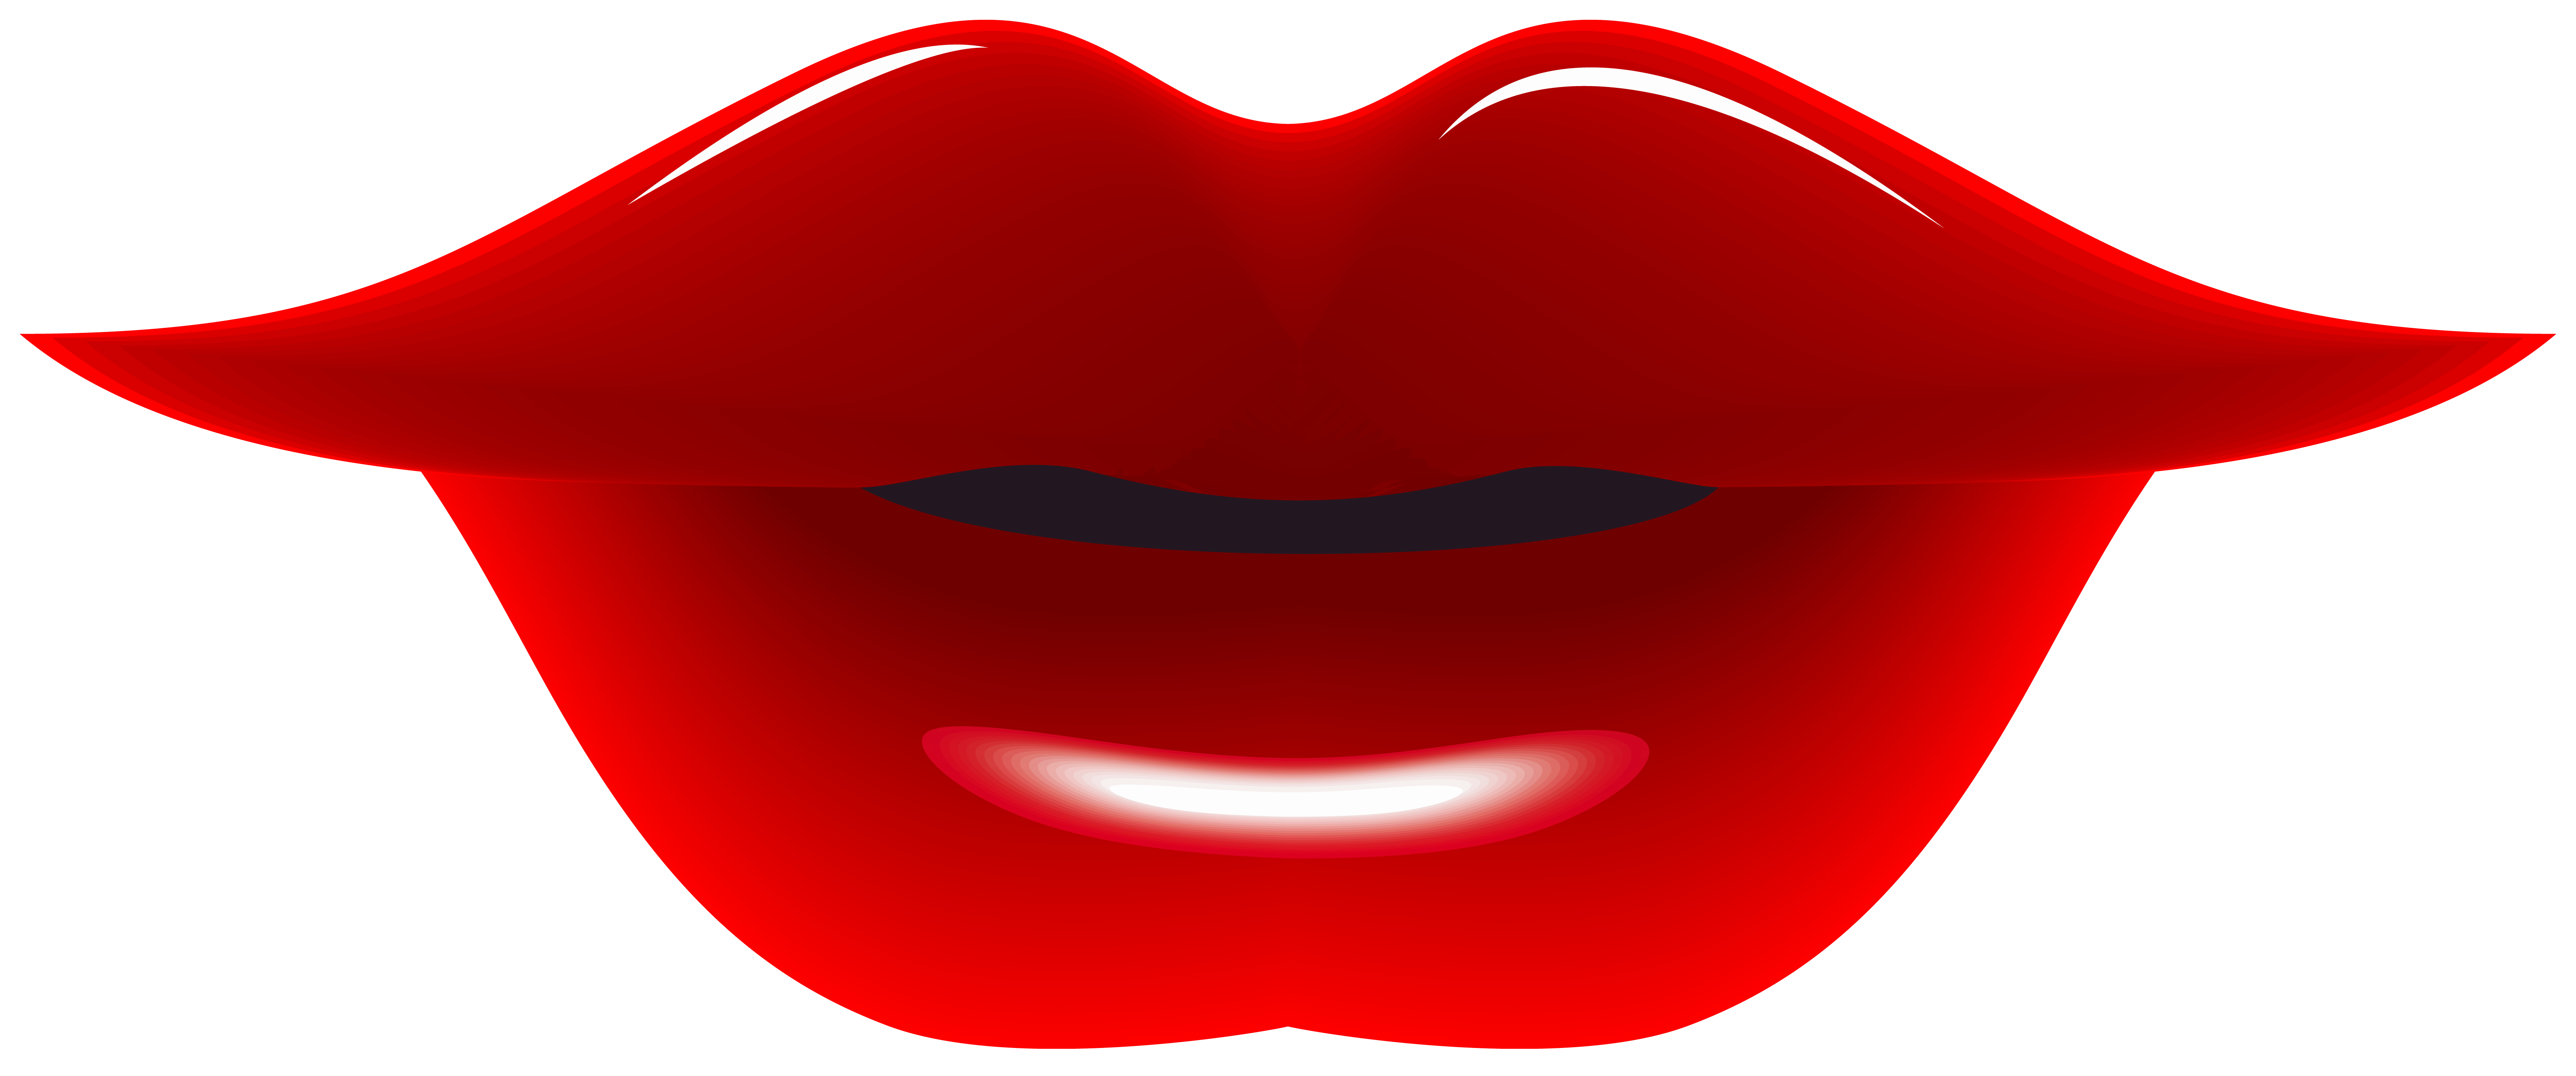 Lips clipart cute, Lips cute Transparent FREE for download